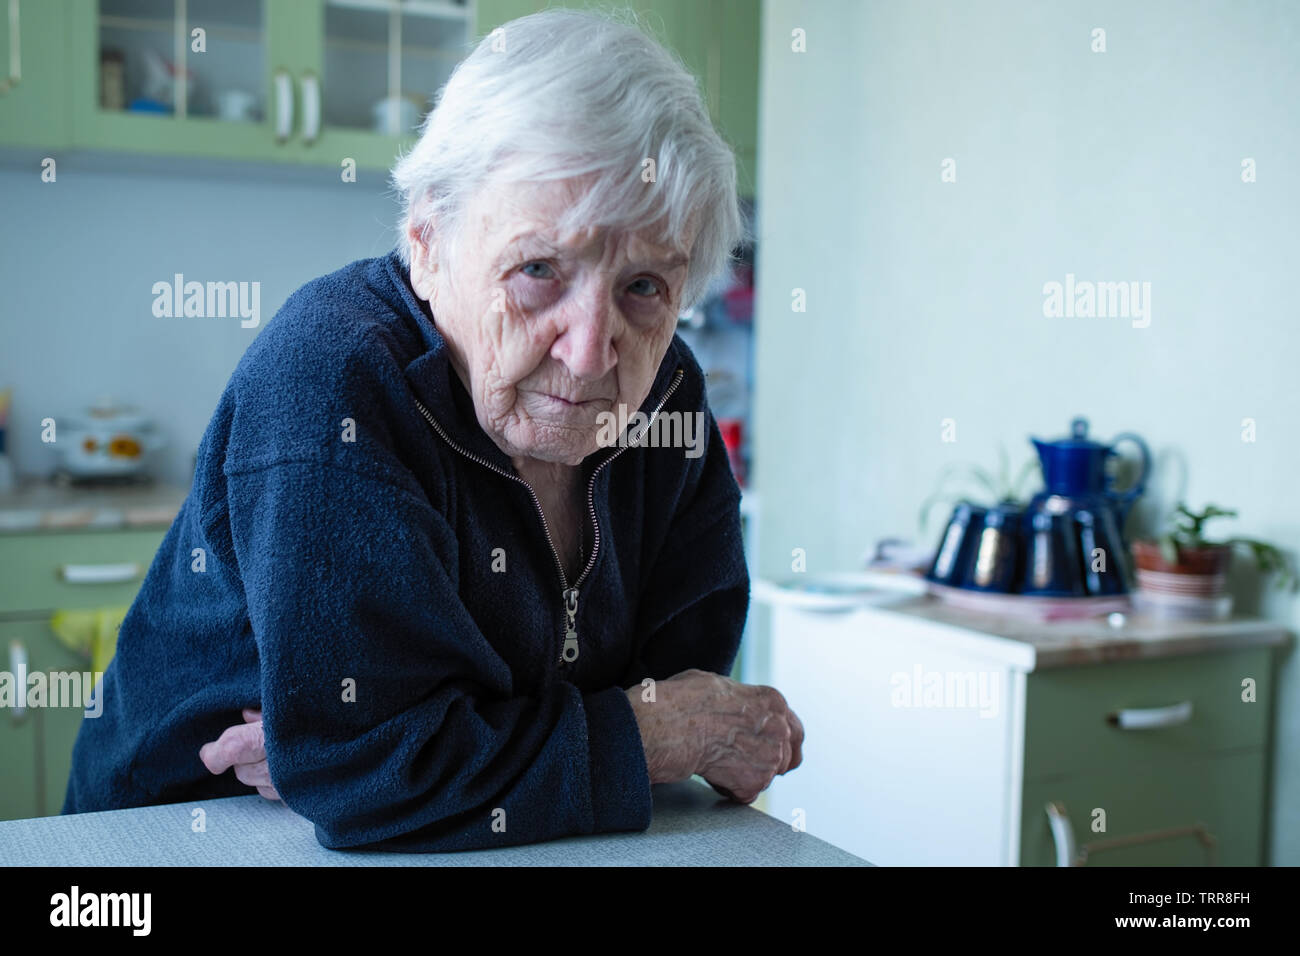 Frowned the old lady is in his house. Stock Photo